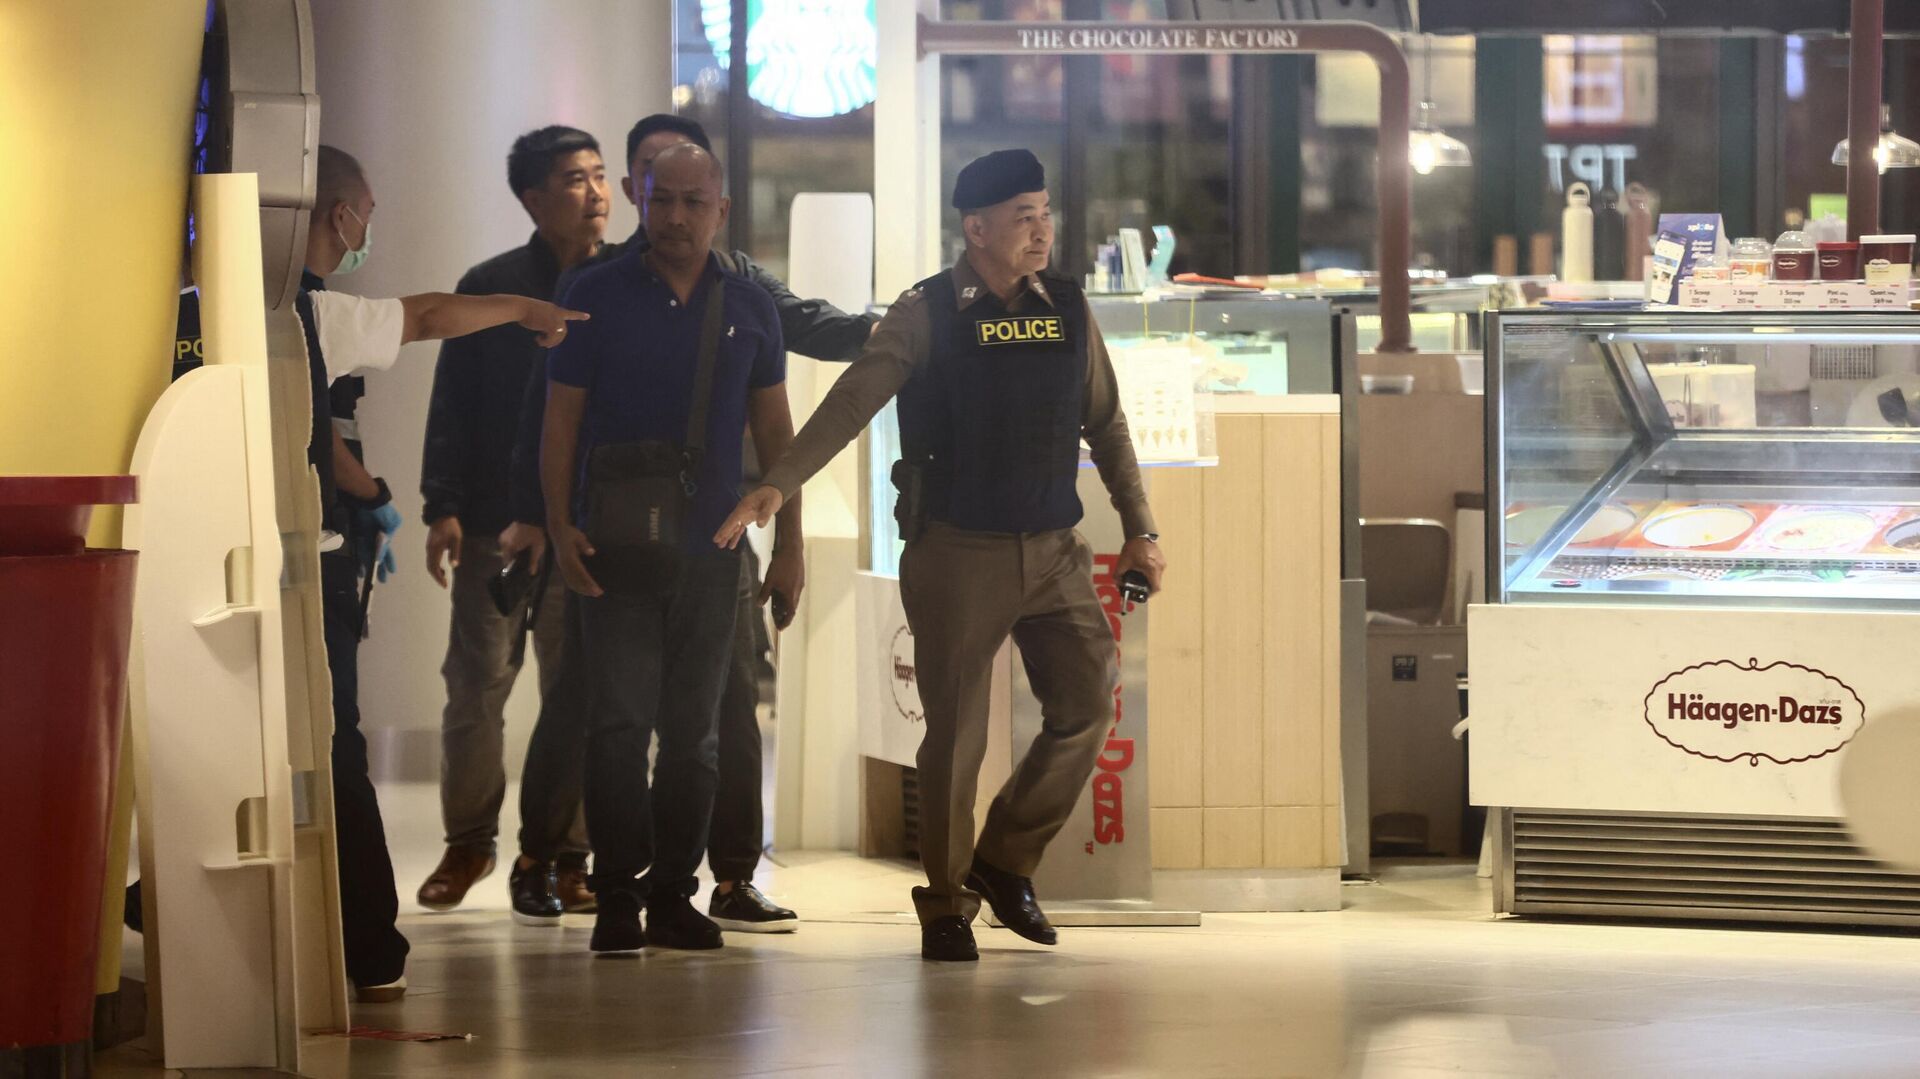 The teenager who killed people in a shopping mall in Thailand said he was hallucinating